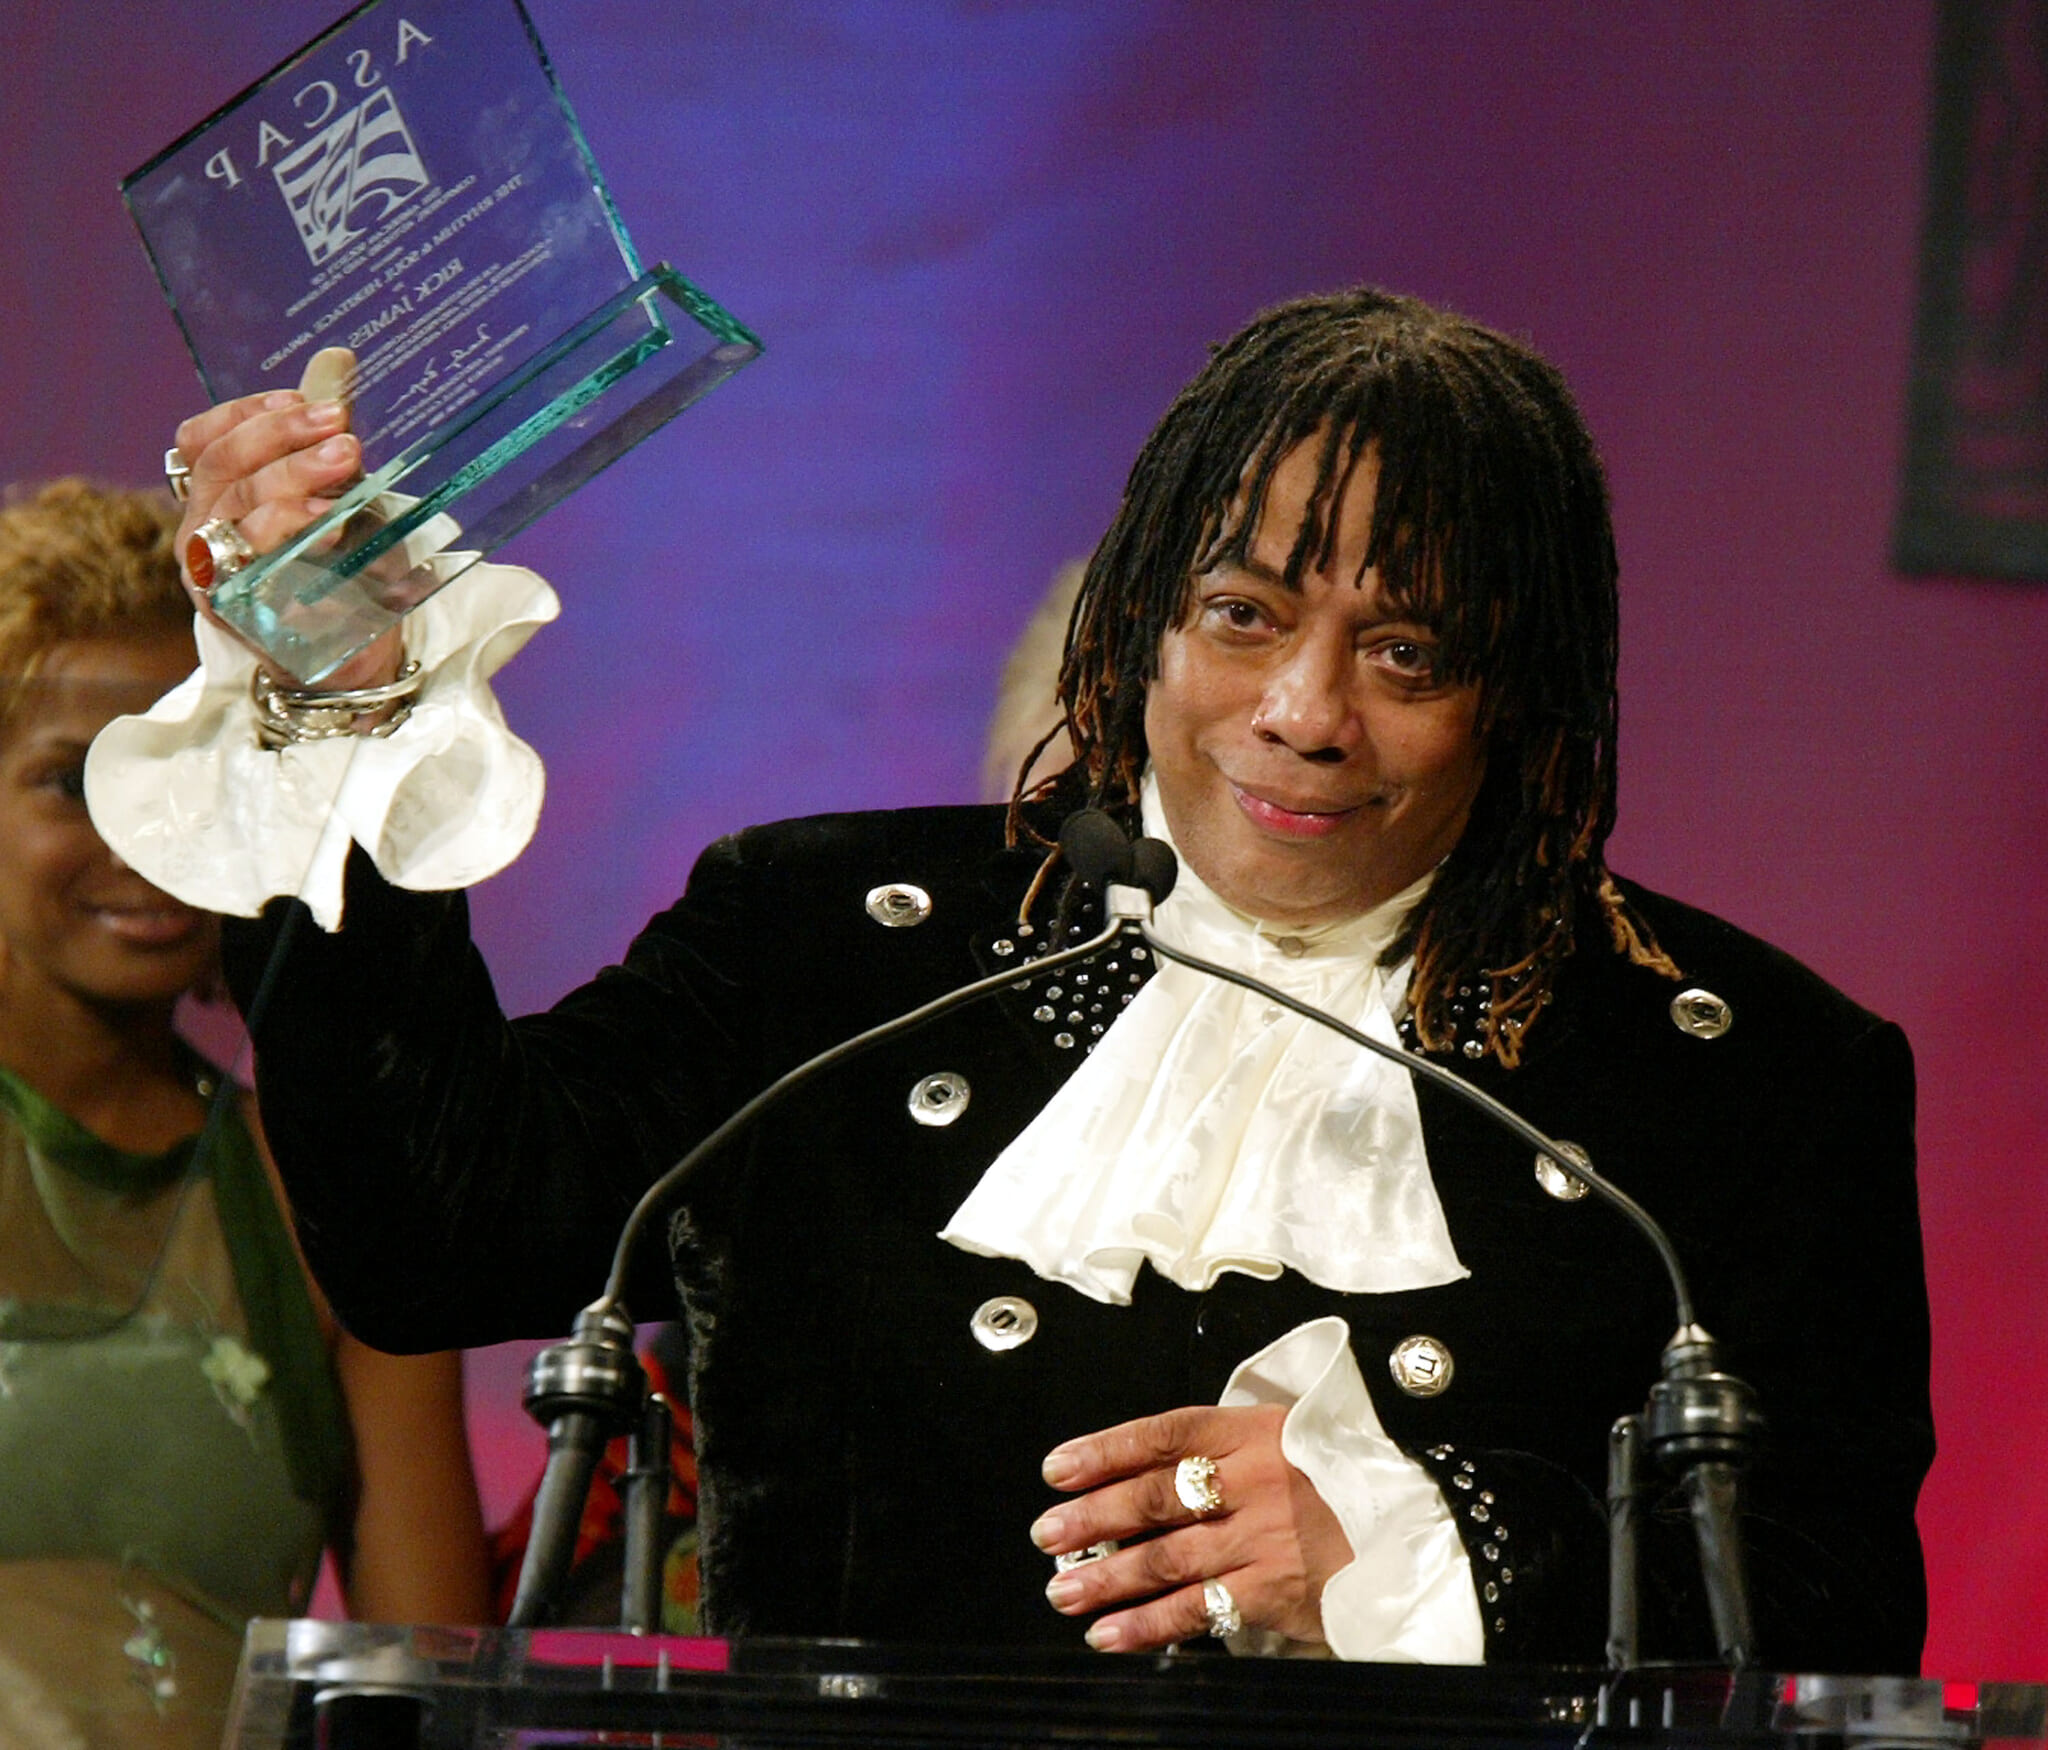 Complex story of Rick James captured in new documentary at 2021 Tribeca Fil...